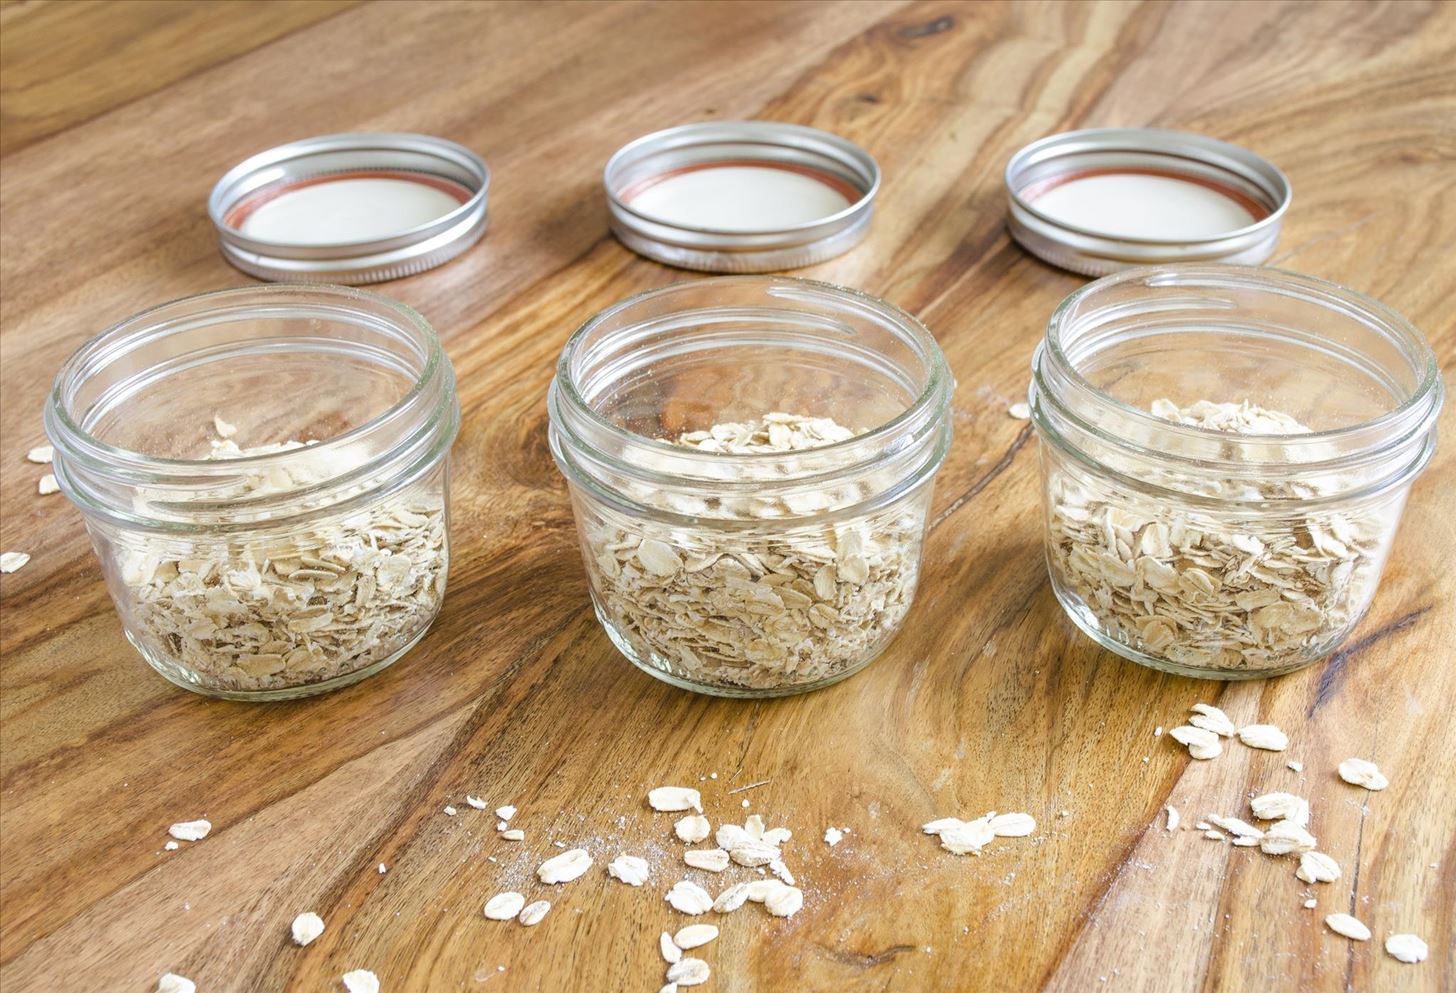 Prep Oats Overnight for Easy Grab-&-Go Breakfasts All Week